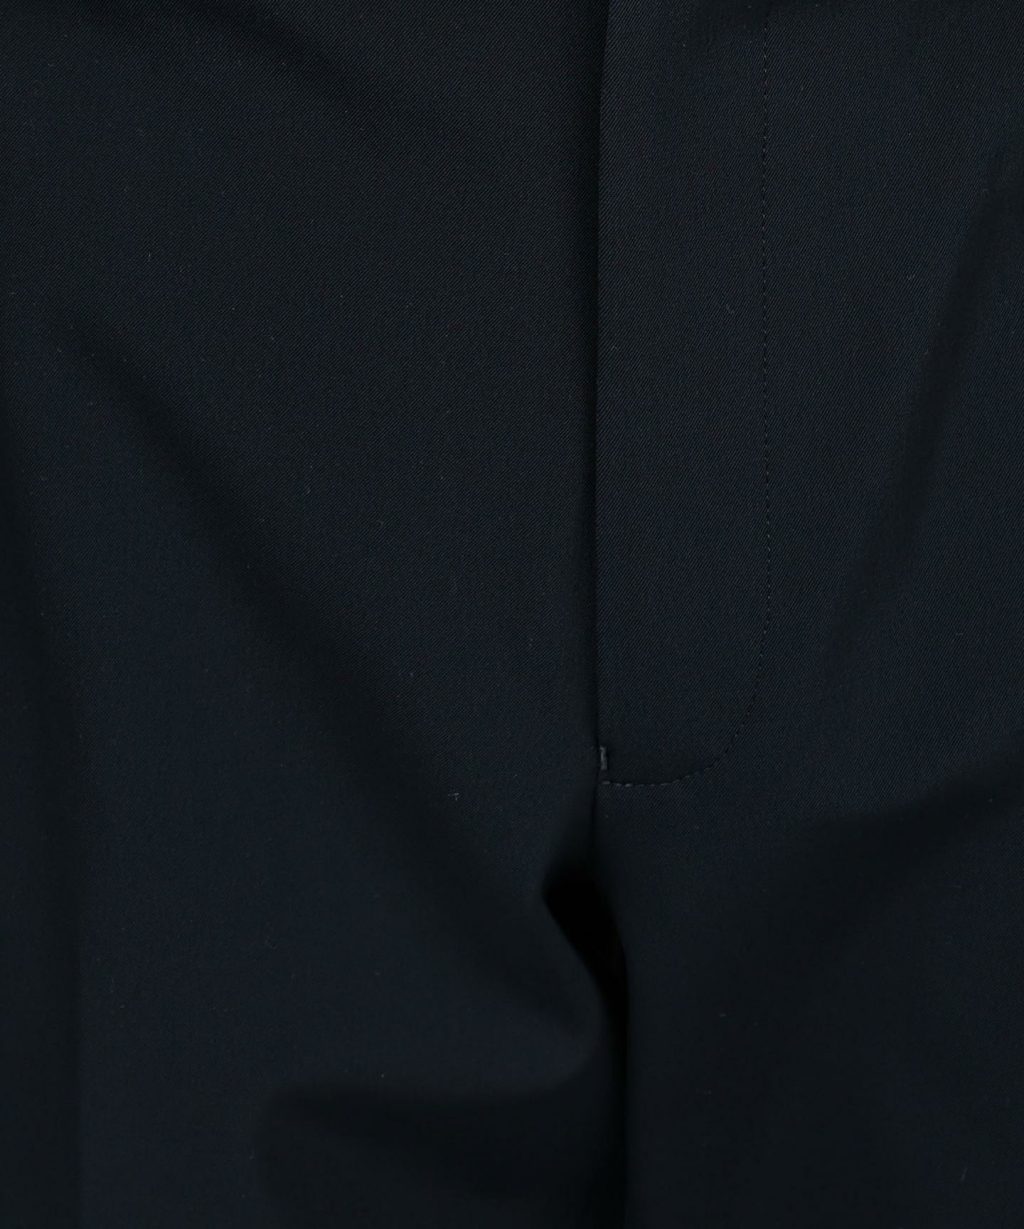 united-arrows-enroute-nylon-twill-jacket-pants-recommend